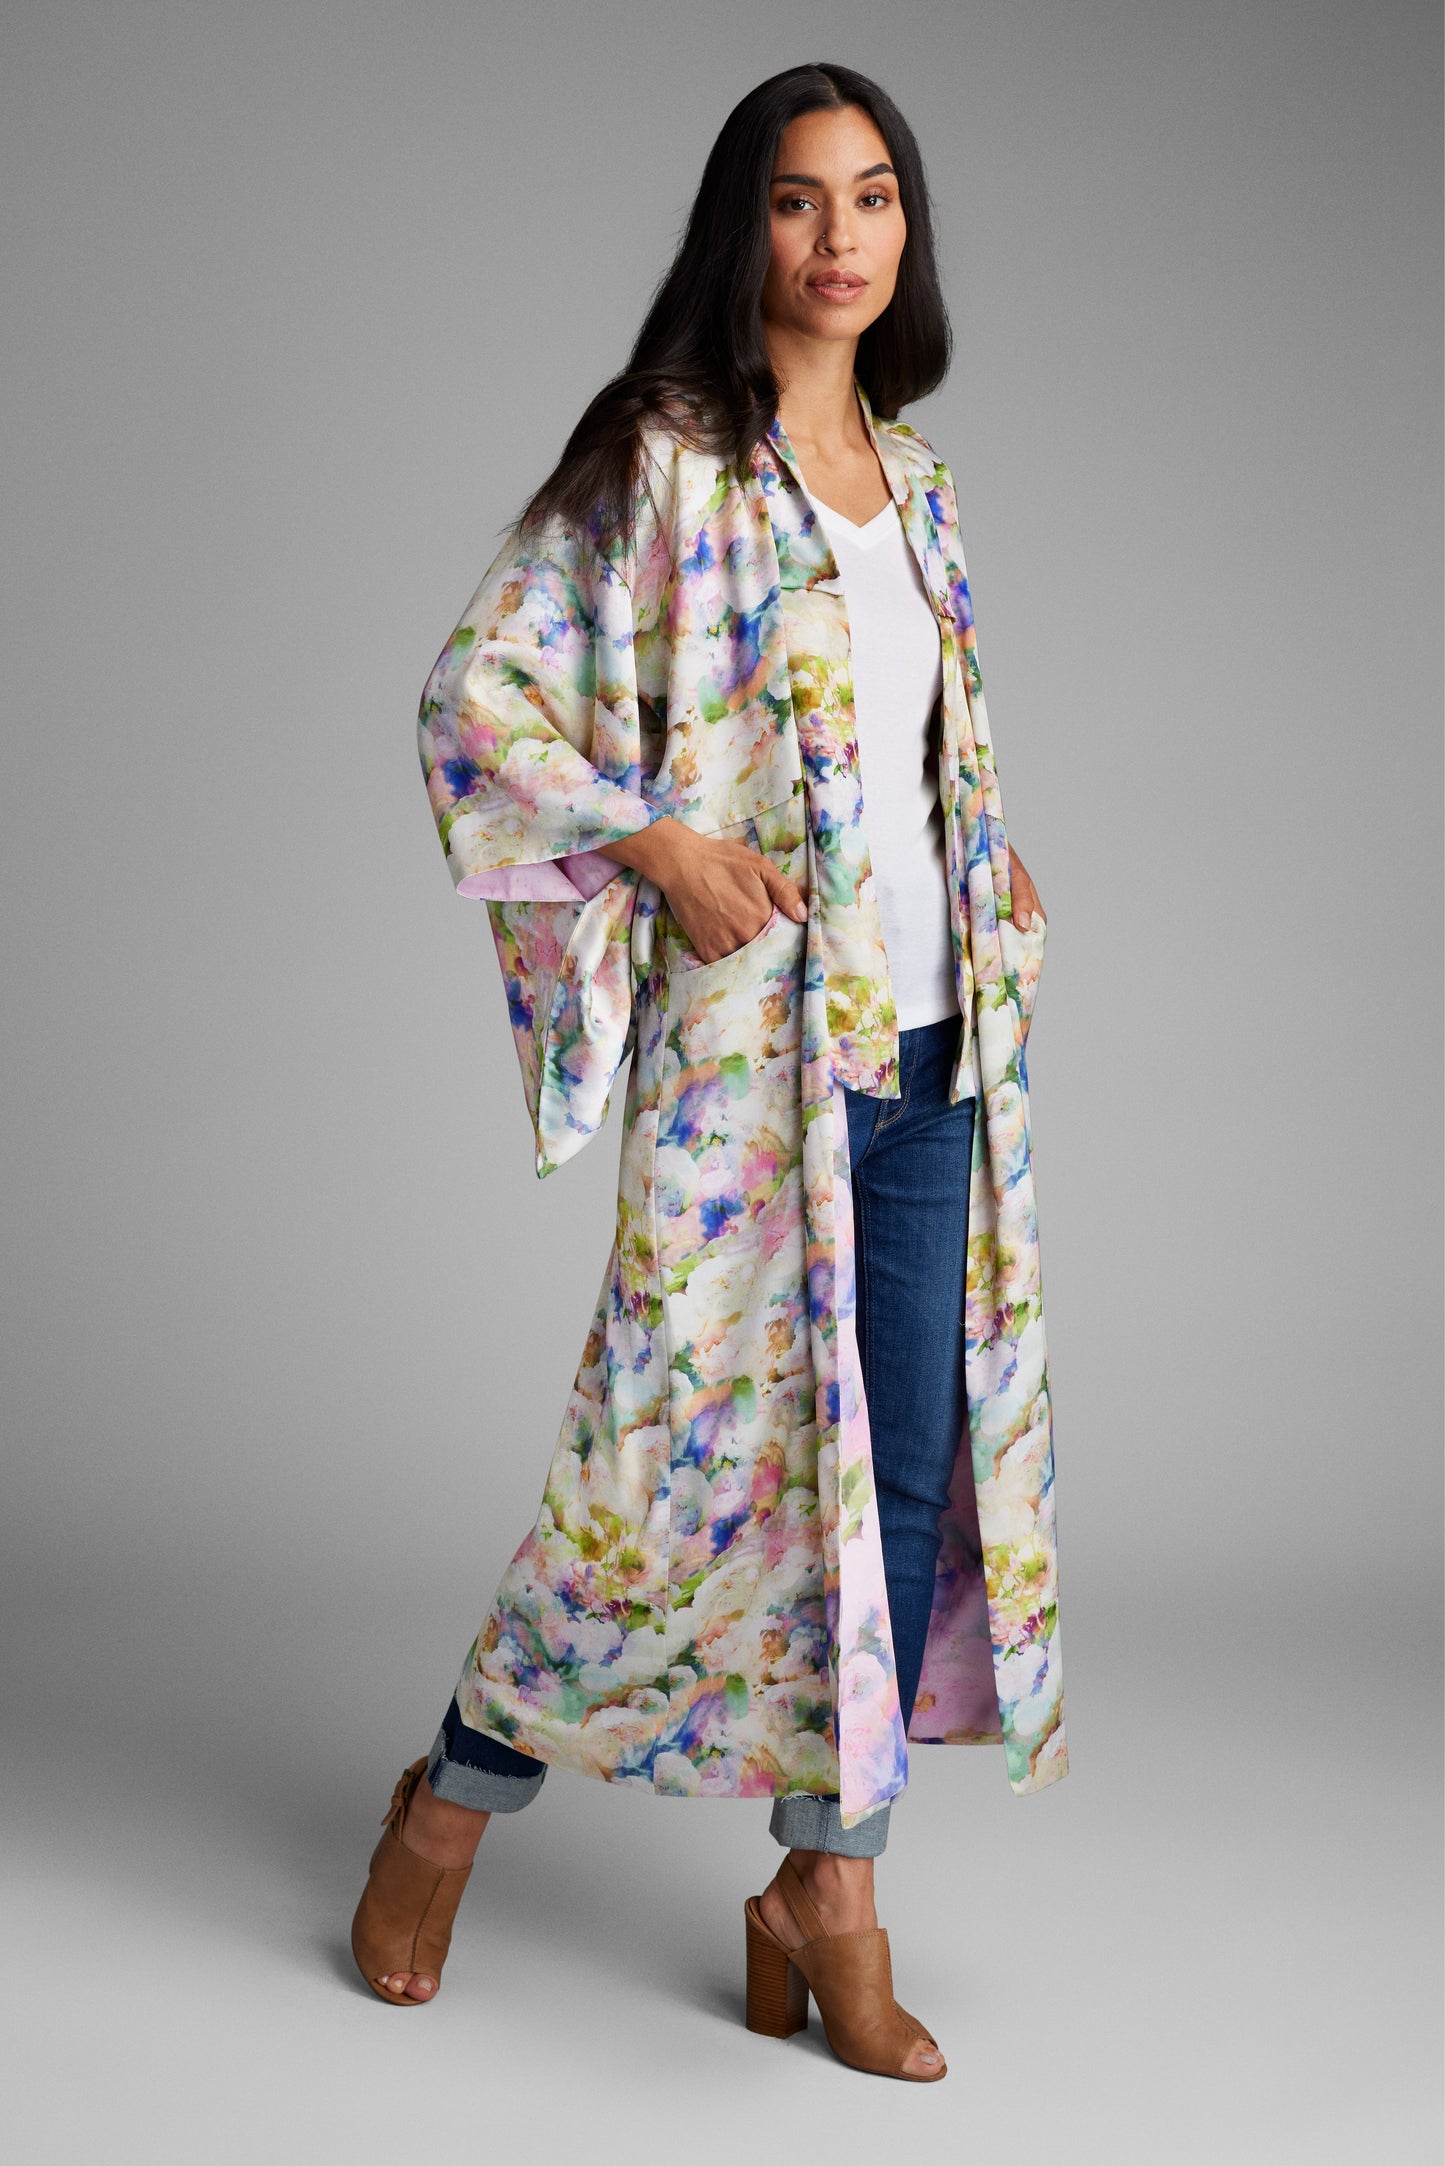 Front profile of woman wearing an all over floral printed kimono duster made from recycled textiles 2